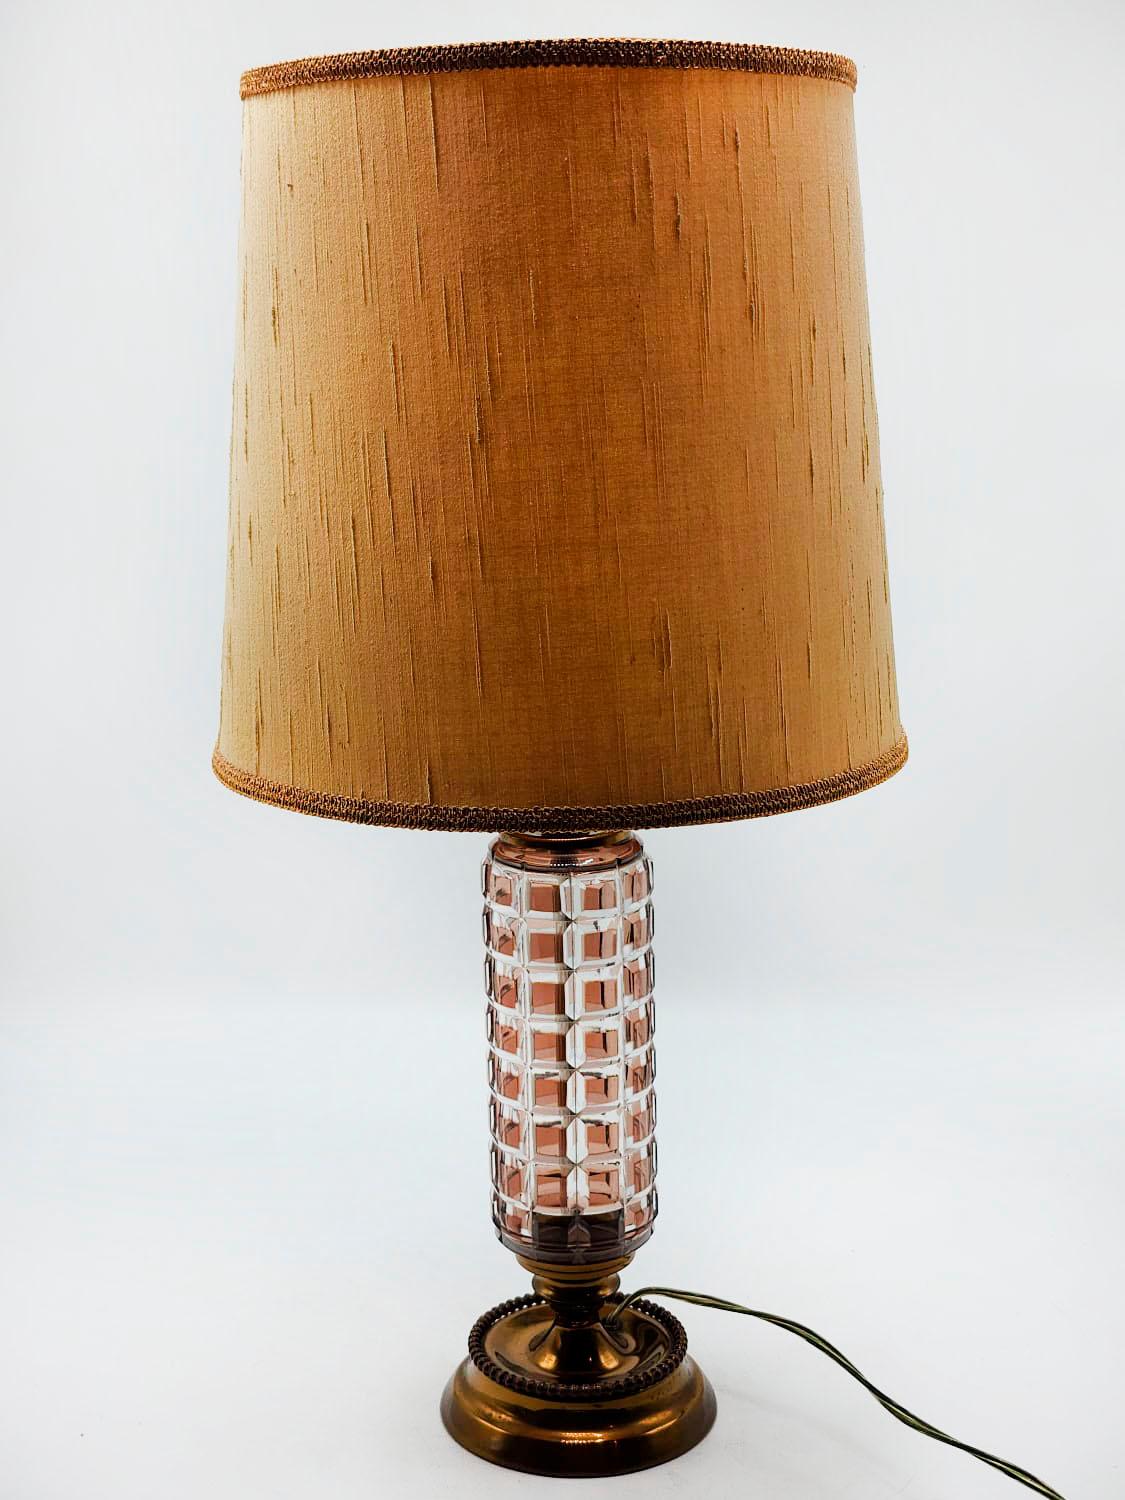 English Vintage art deco table lamp from the 20th century